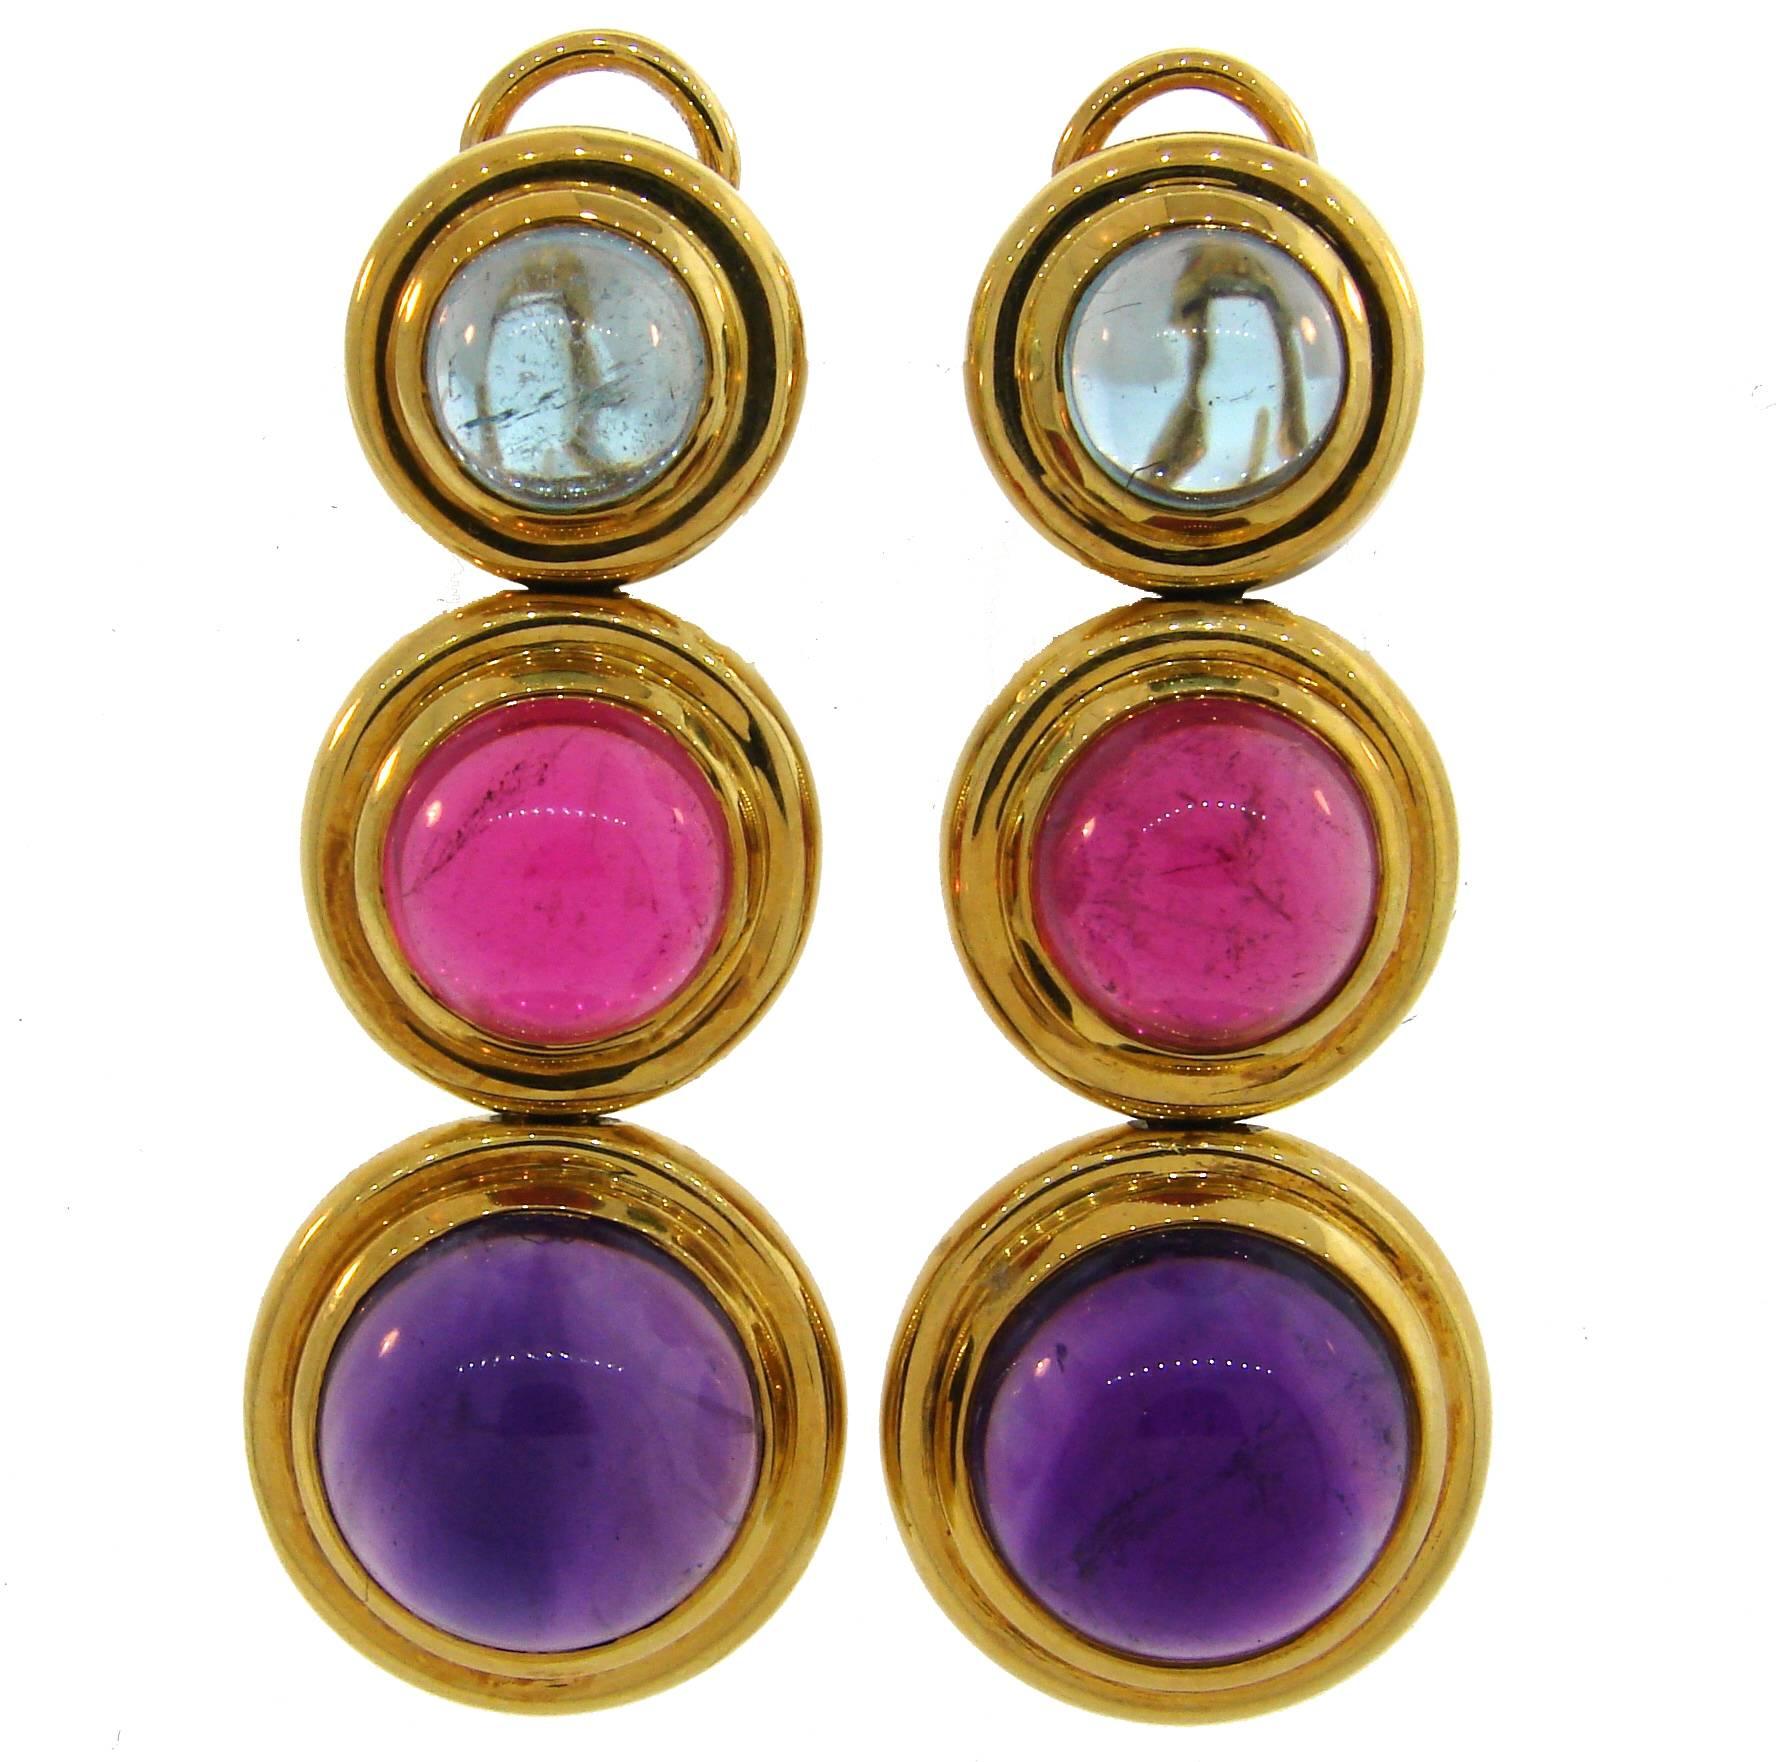 Tiffany Paloma Picasso Gemstones Gold Earrings 1980s 